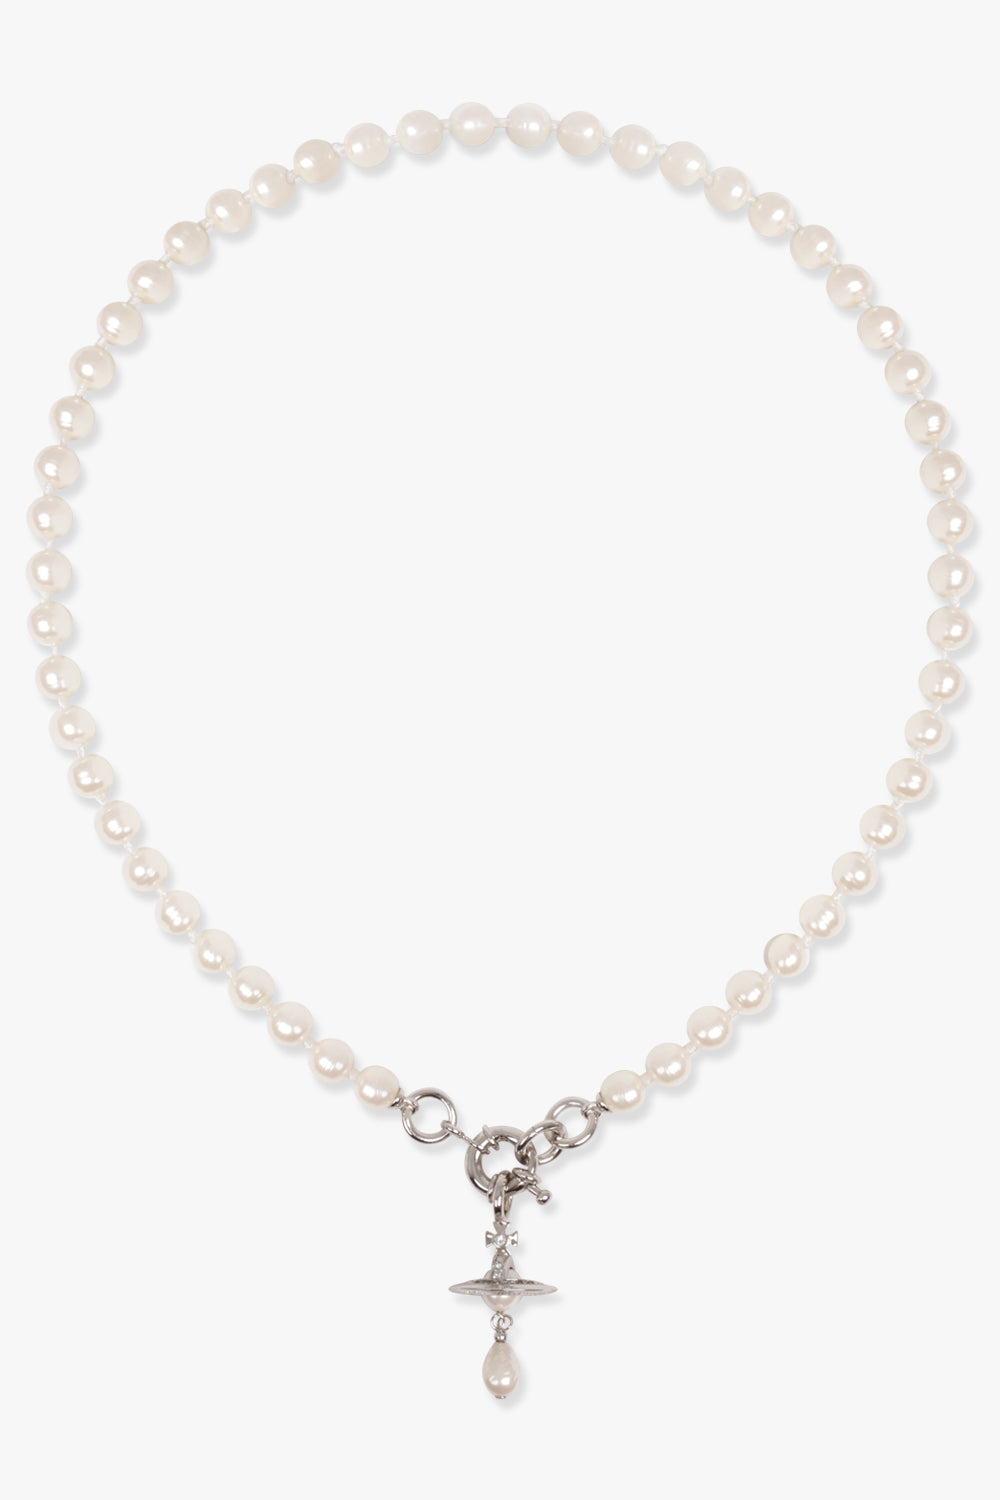 VIVIENNE WESTWOOD JEWELLRY SILVER / SILVER ALEKSA PEARL NECKLACE | CREAM ROSE PEARL/SILVER